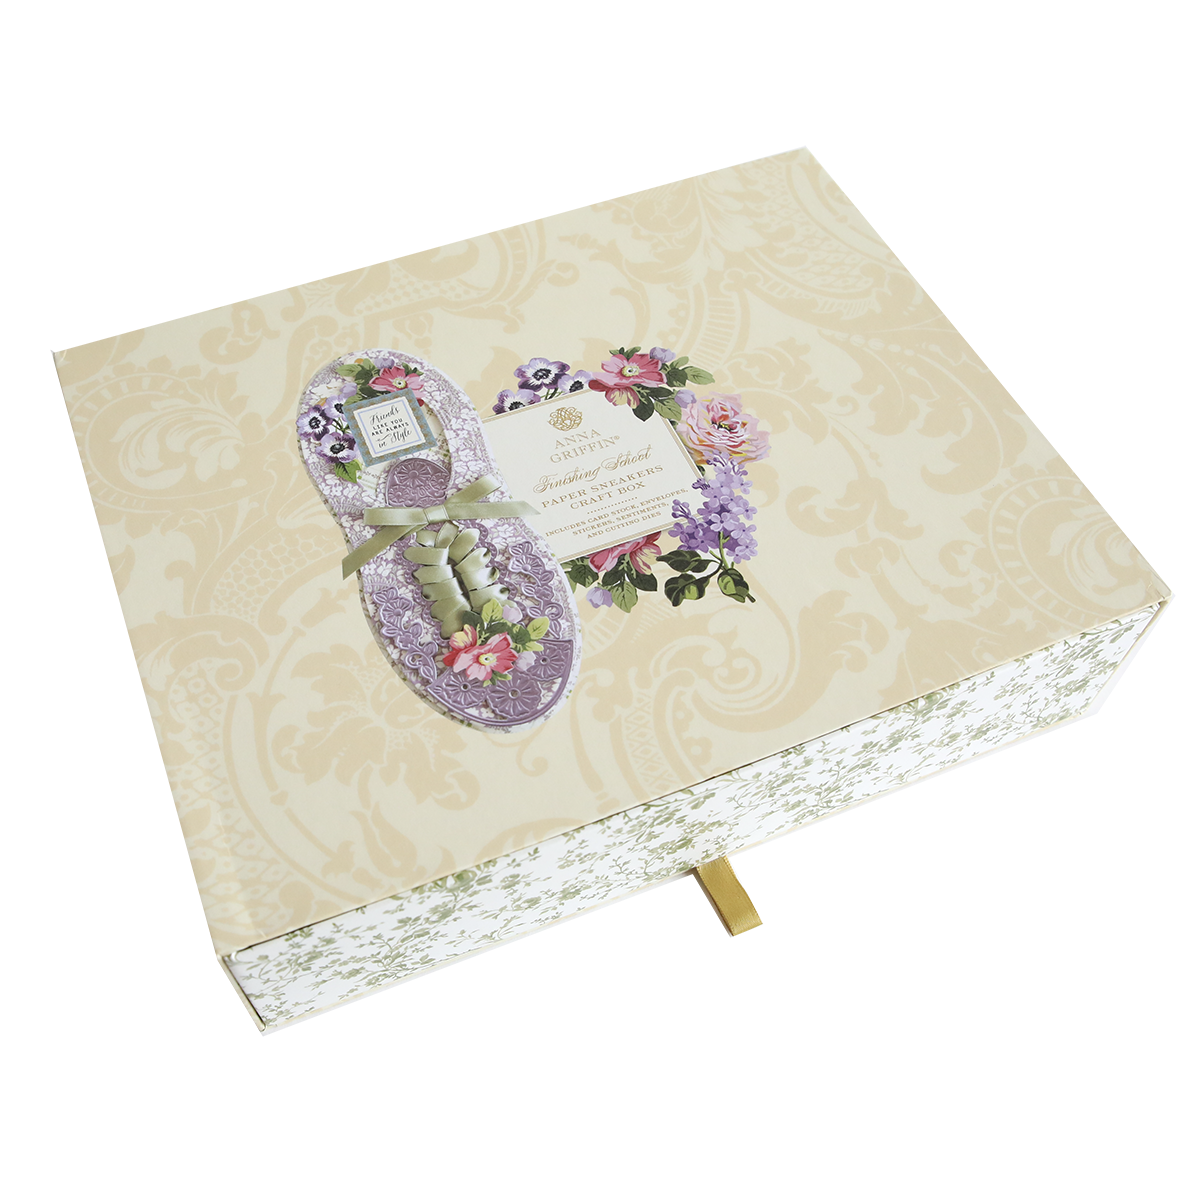 A floral-patterned women's sandal, designed by Anna, is displayed atop a 2024 Finishing School Craft Box Autoship with a bow.